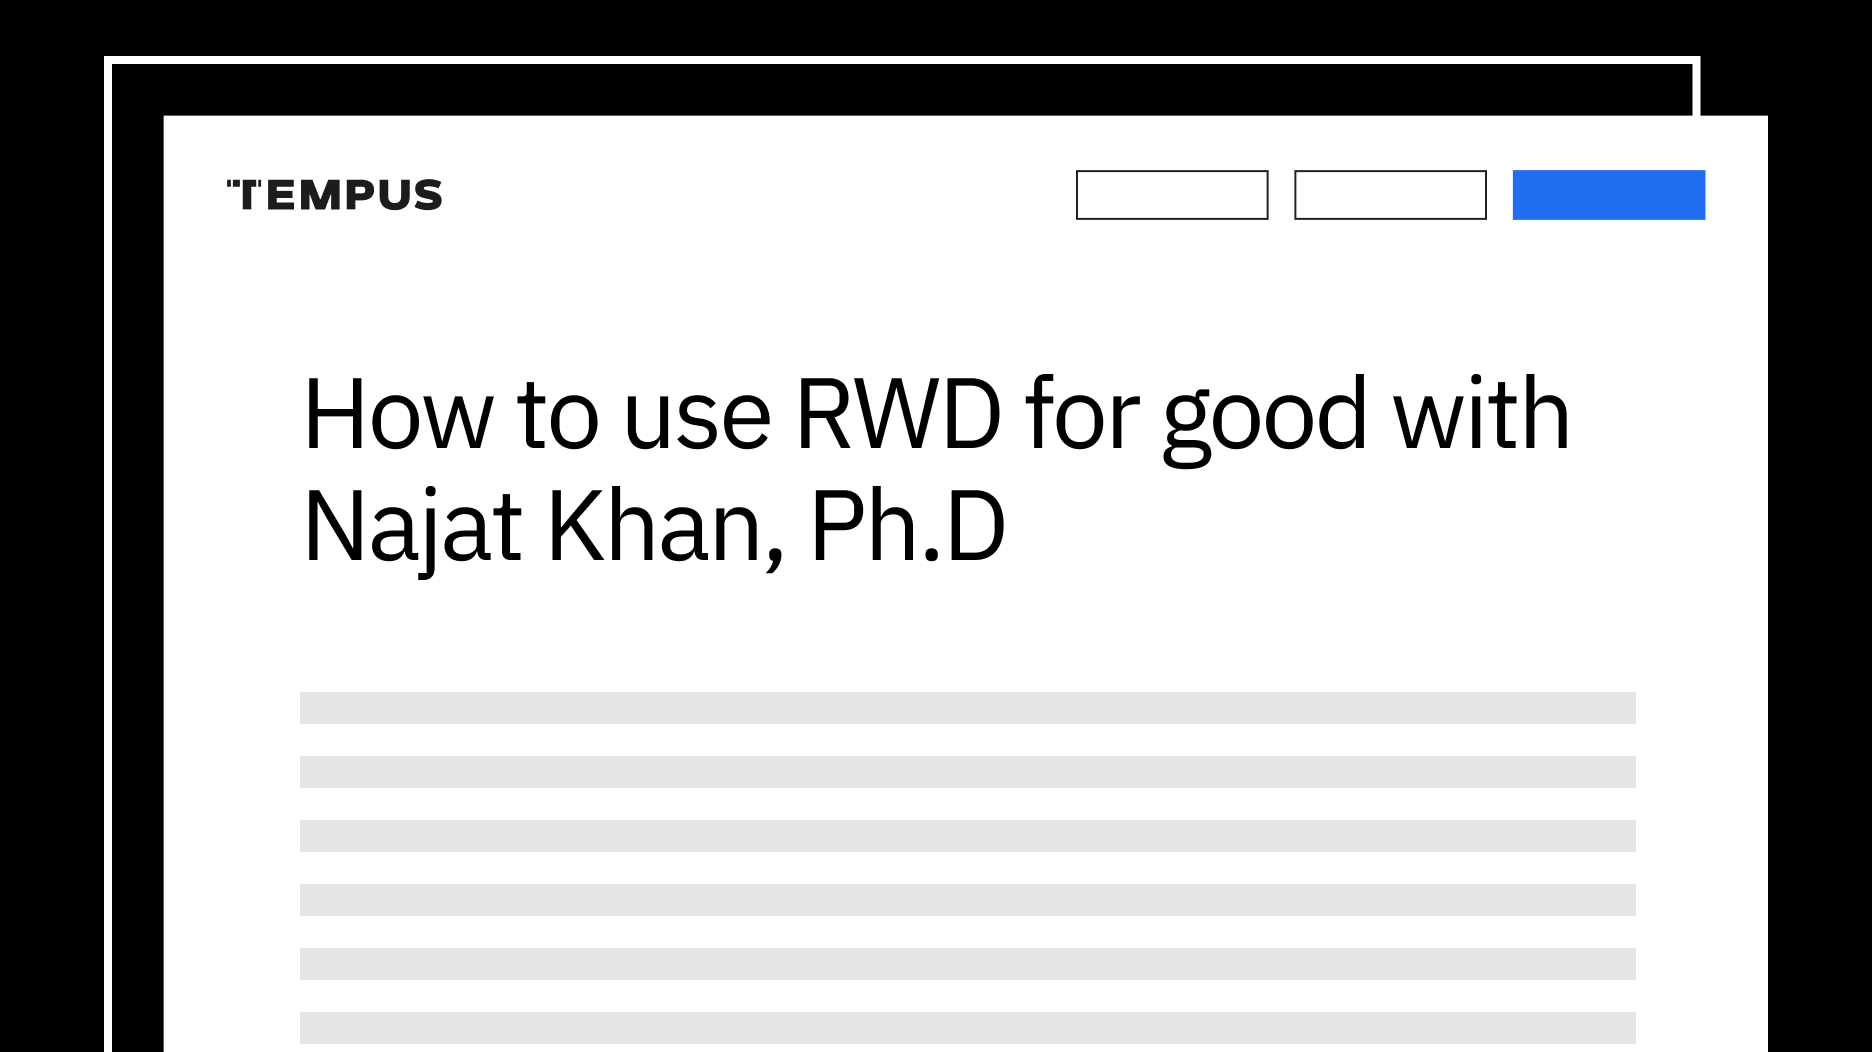 How to use RWD for good with Najat Khan, Ph.D